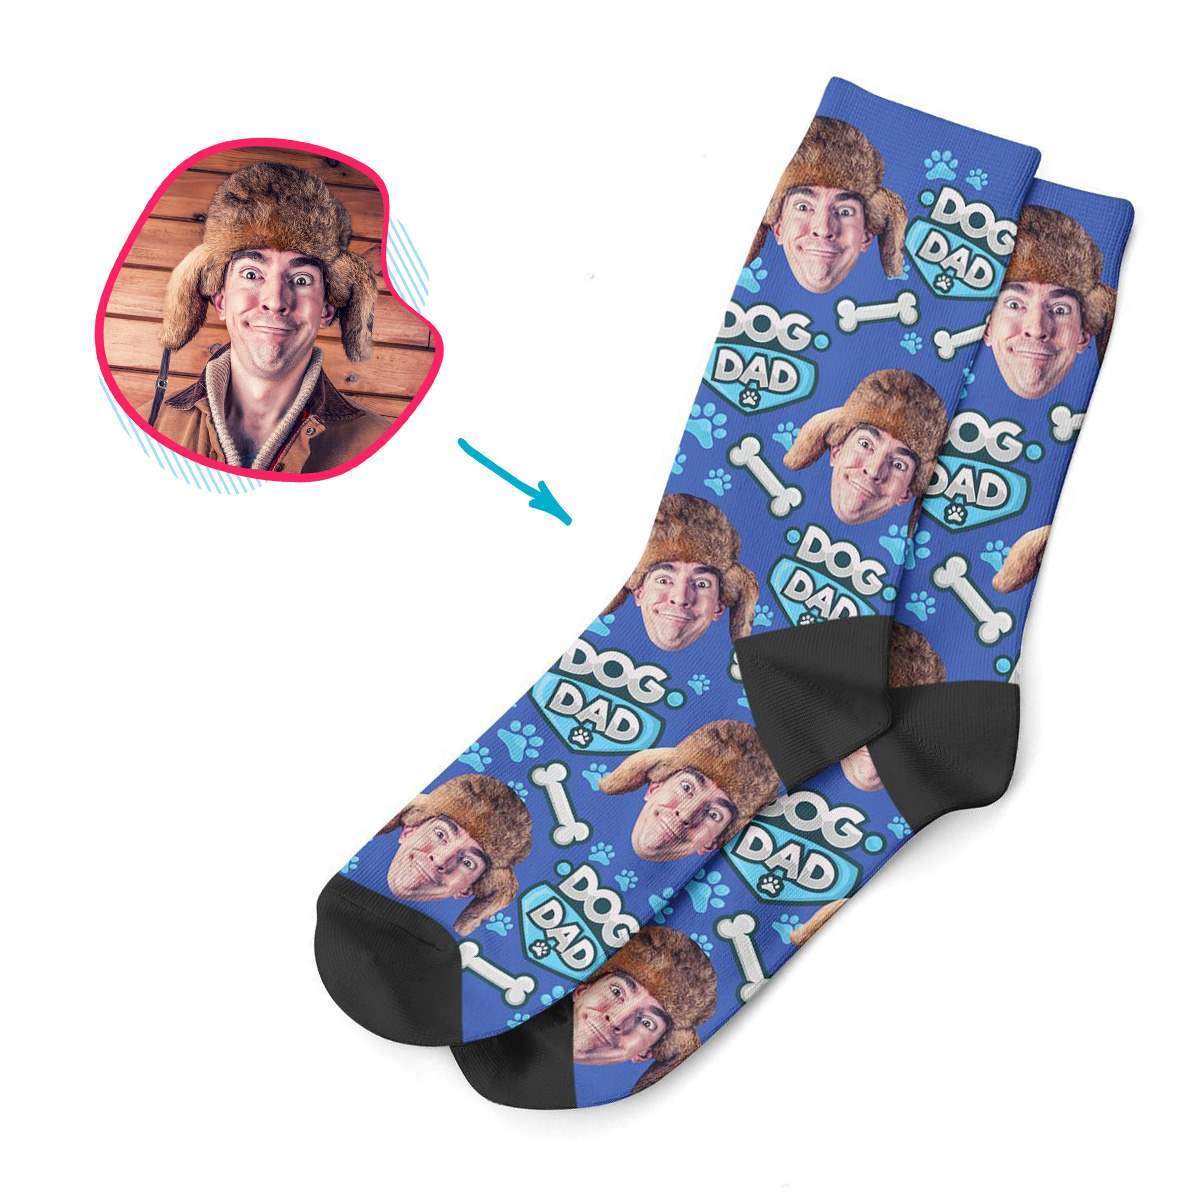 darkblue Dog Dad socks personalized with photo of face printed on them